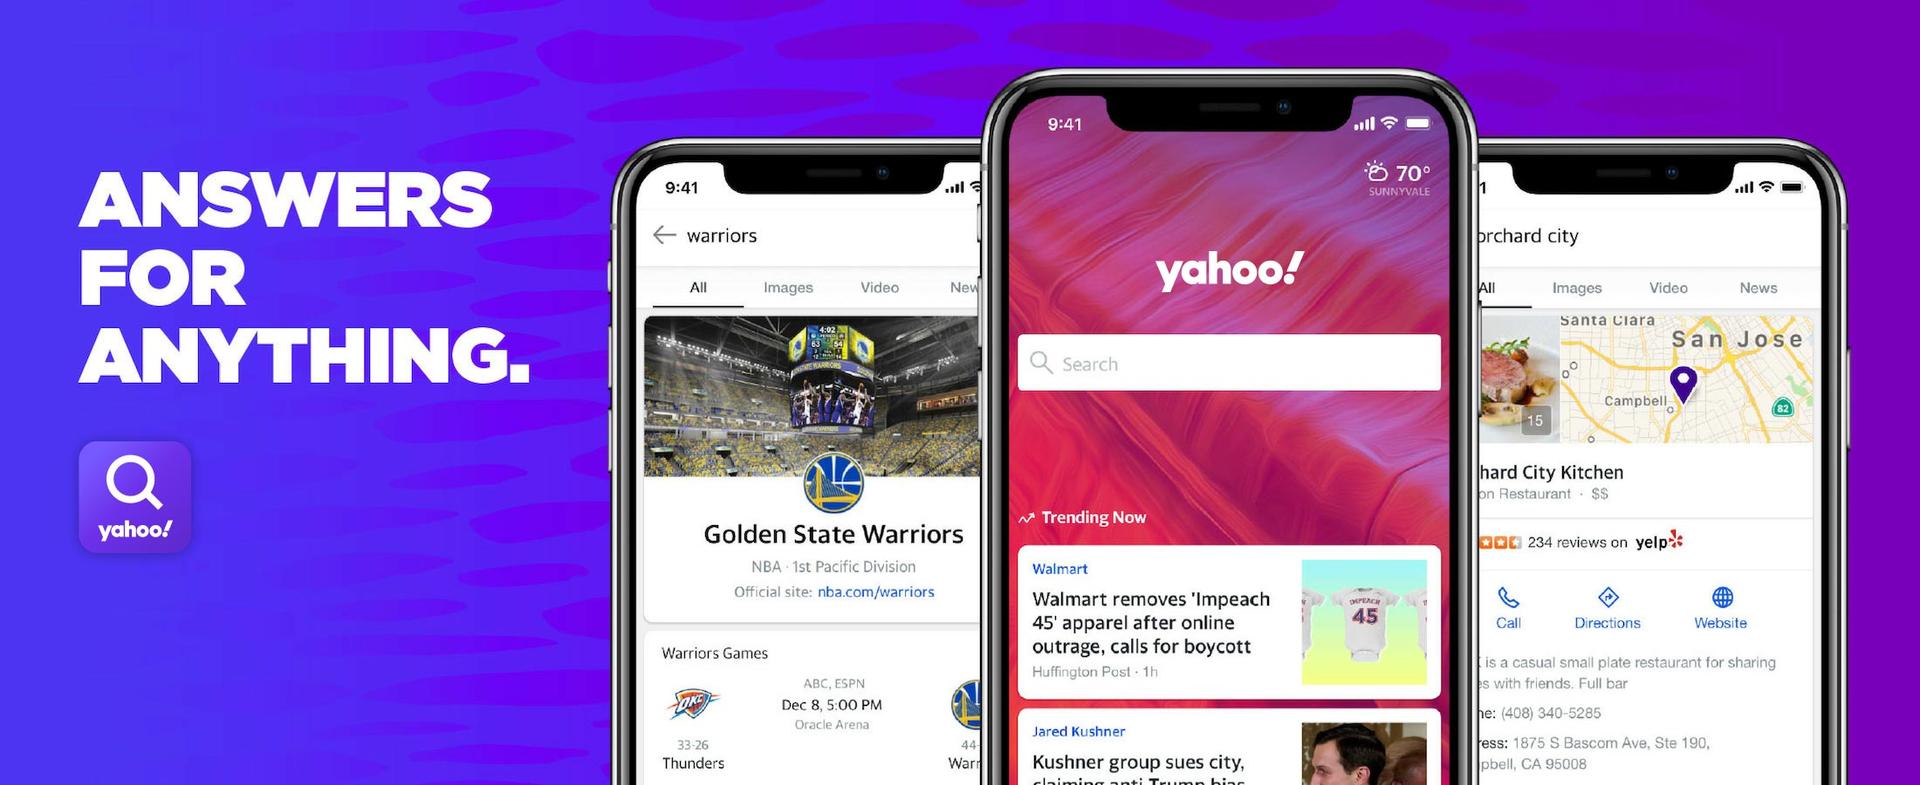 An advertisement for yahoo.com showing personalized search across multiple mobile devices